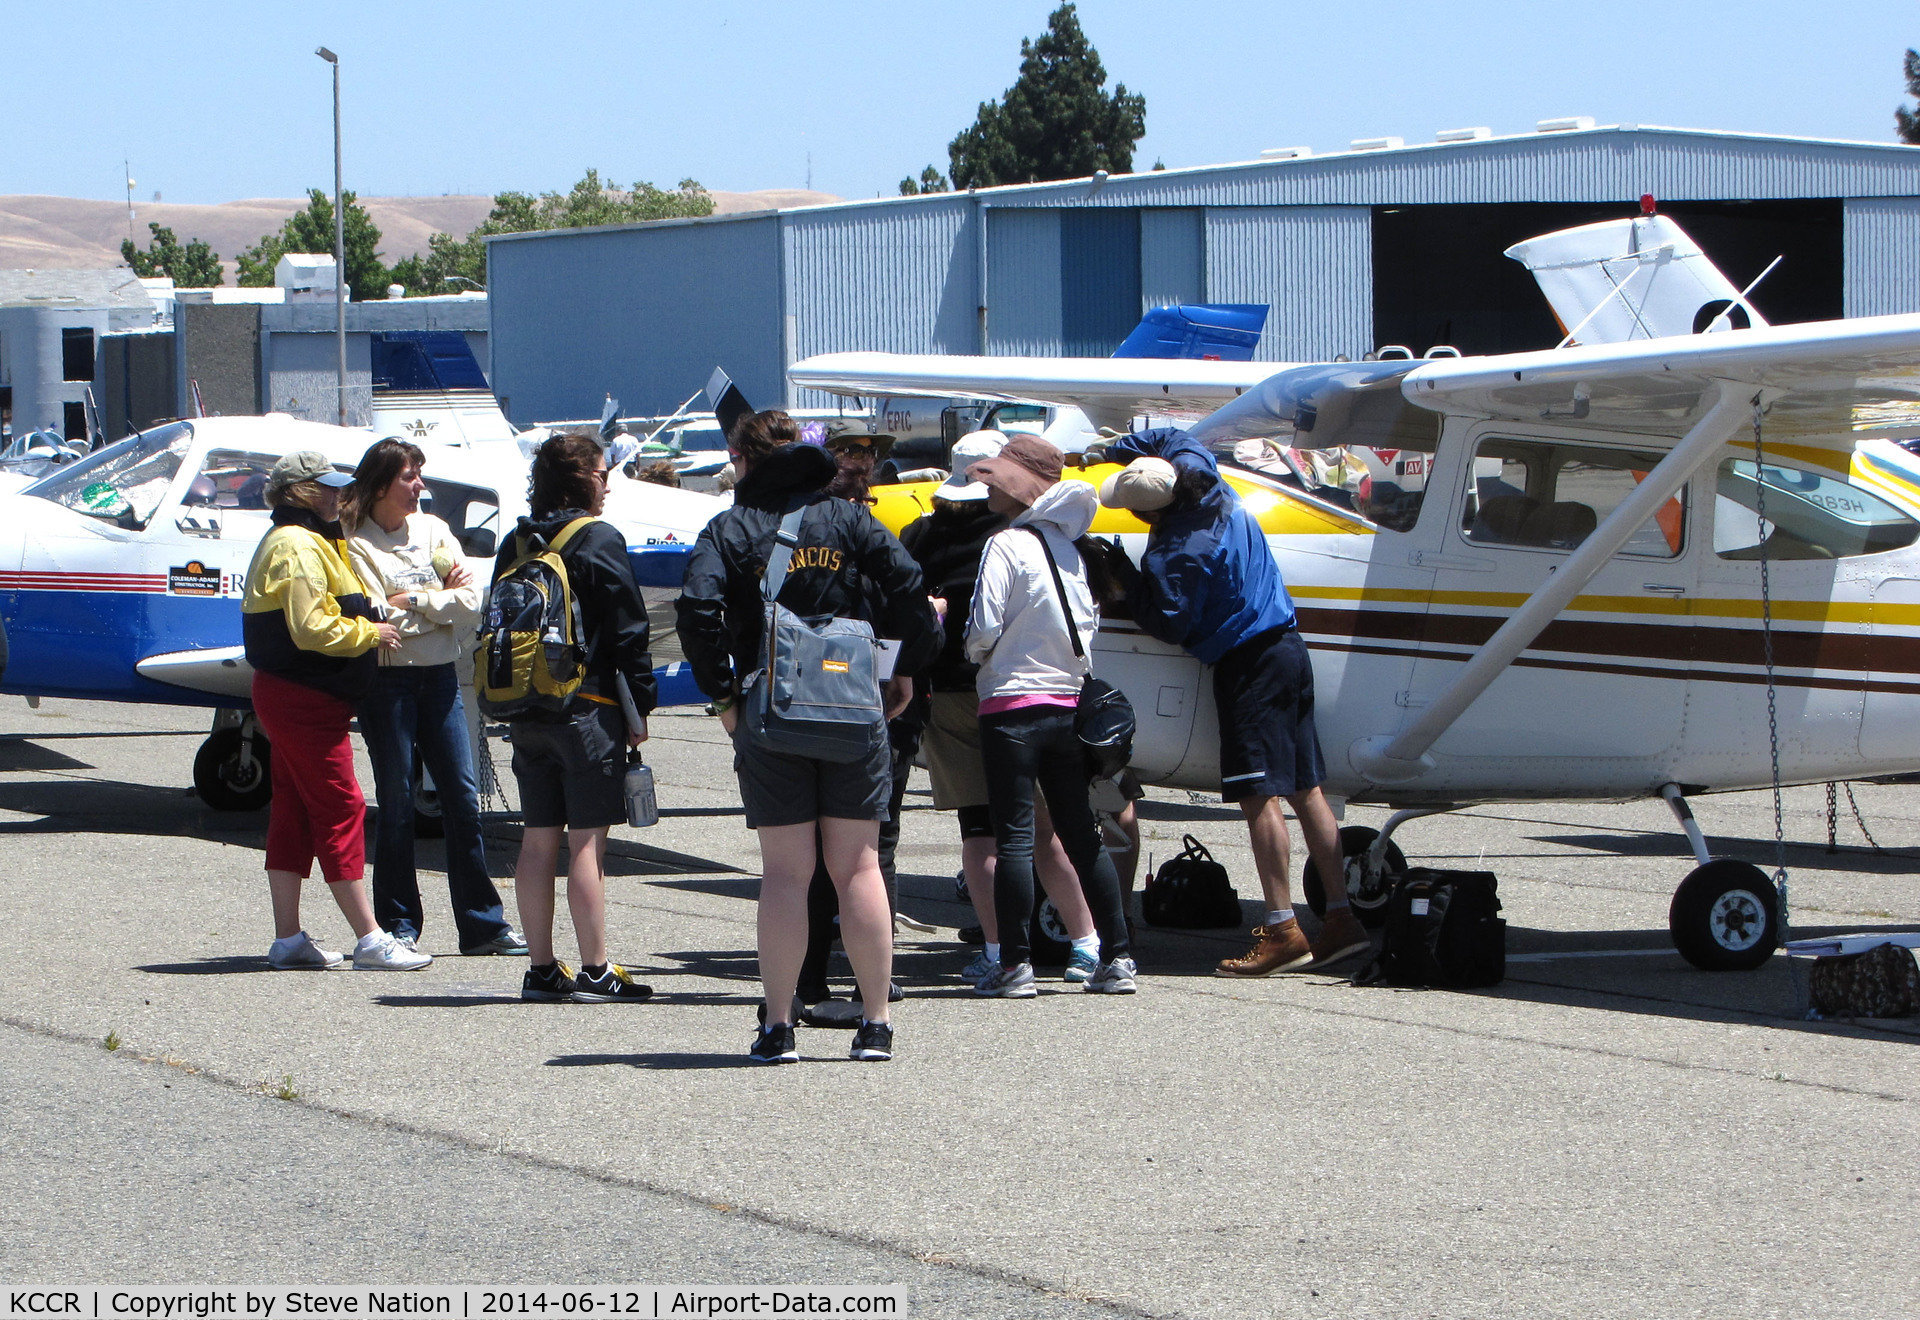 Buchanan Field Airport (CCR) - 2014 Air Race Classic judges, pilots and ground crews checking out a new arrival for the race @ Buchanan Field, Concord, CA